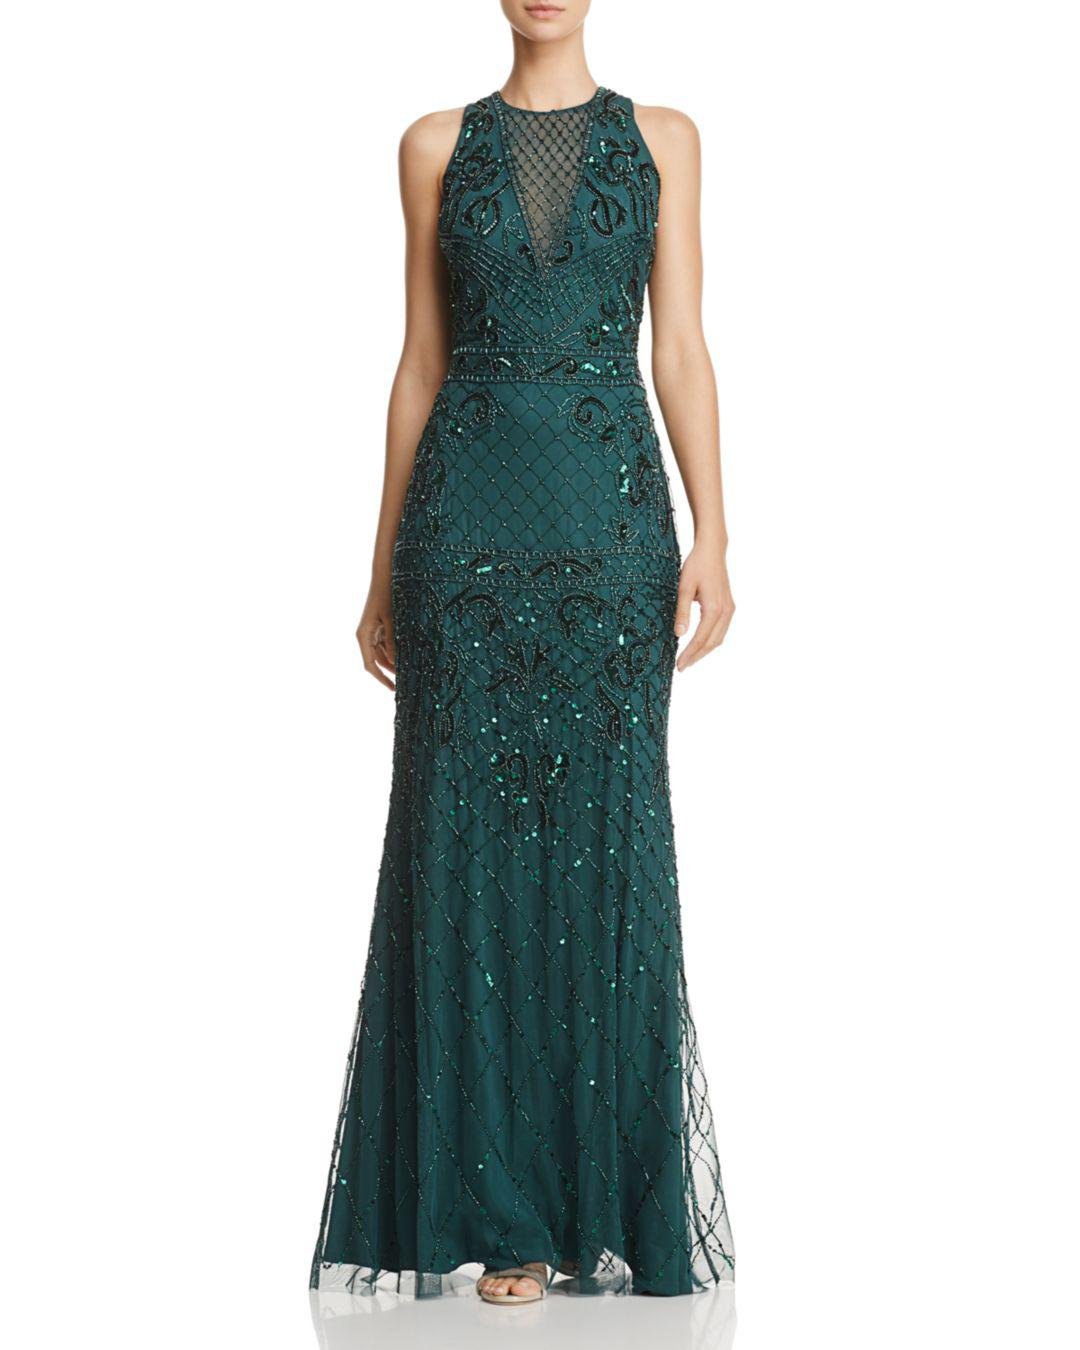 Adrianna Papell Sleeveless Beaded Gown in Dusty Emerald (Green) - Lyst